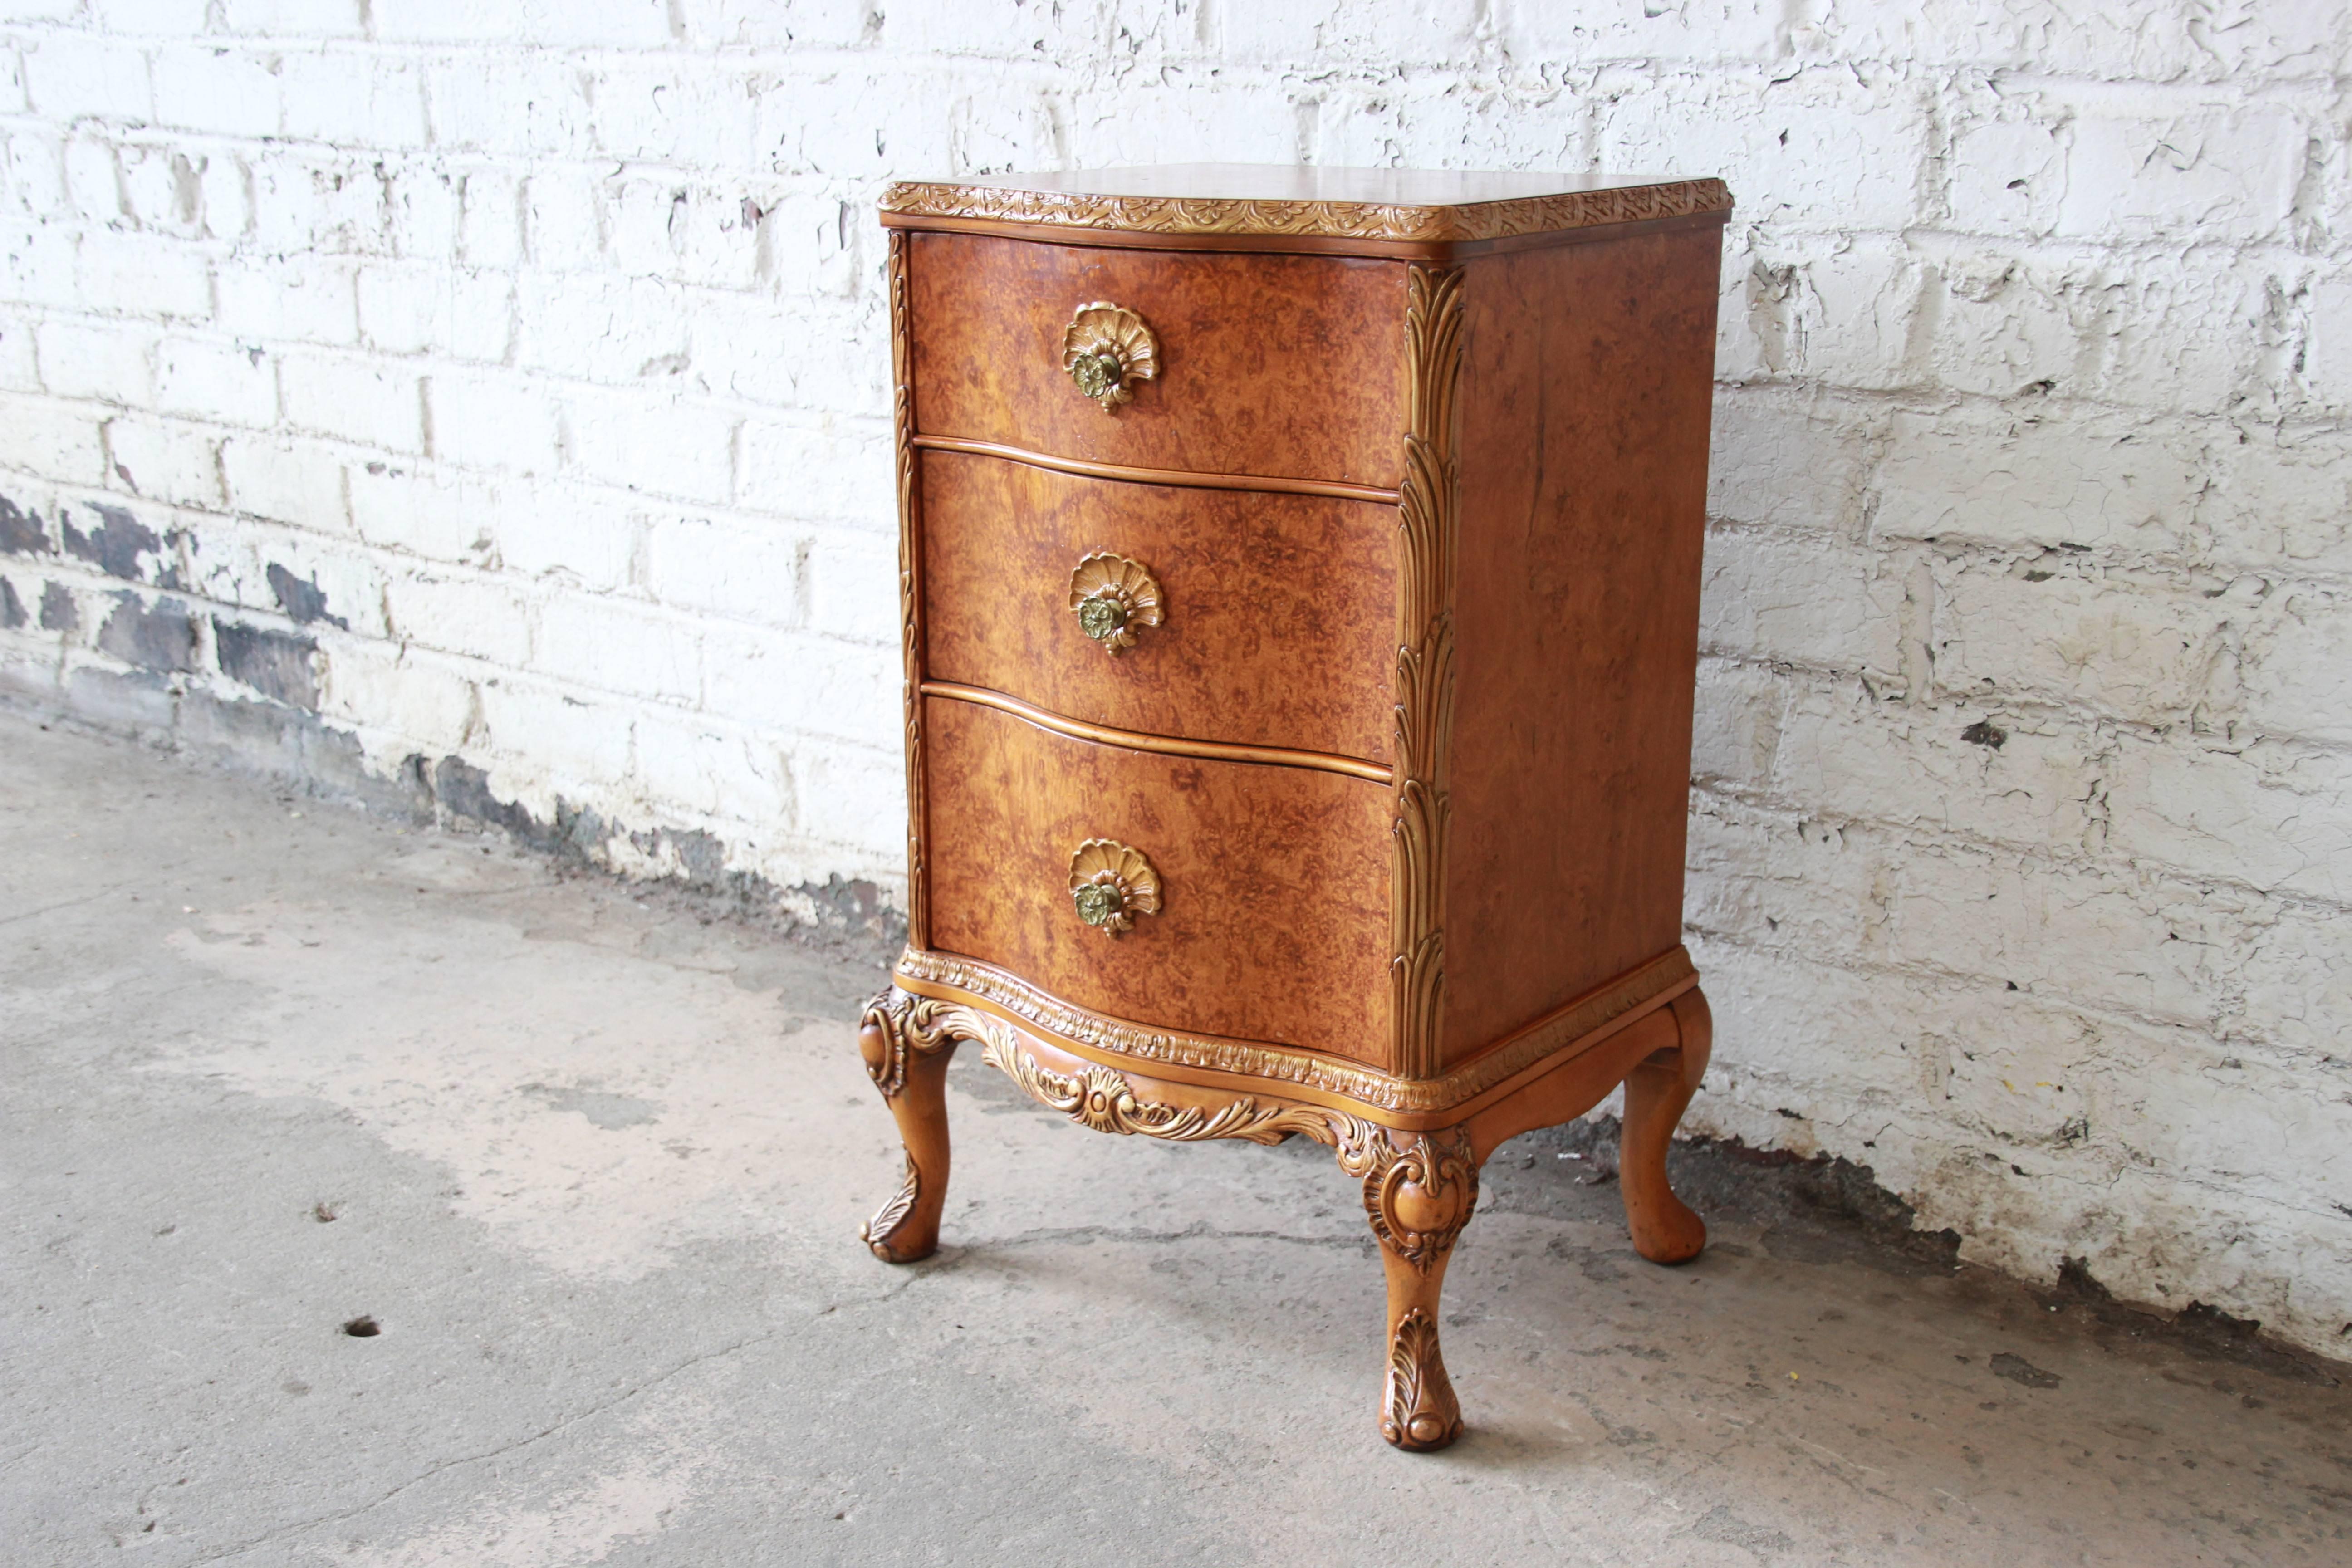 Offering a beautiful burled maple nightstand by Romweber. The nightstand offer three large drawers with original pulls and floral designed accents. It has carved French details throughout the piece and is a stunning piece for any room. The piece is